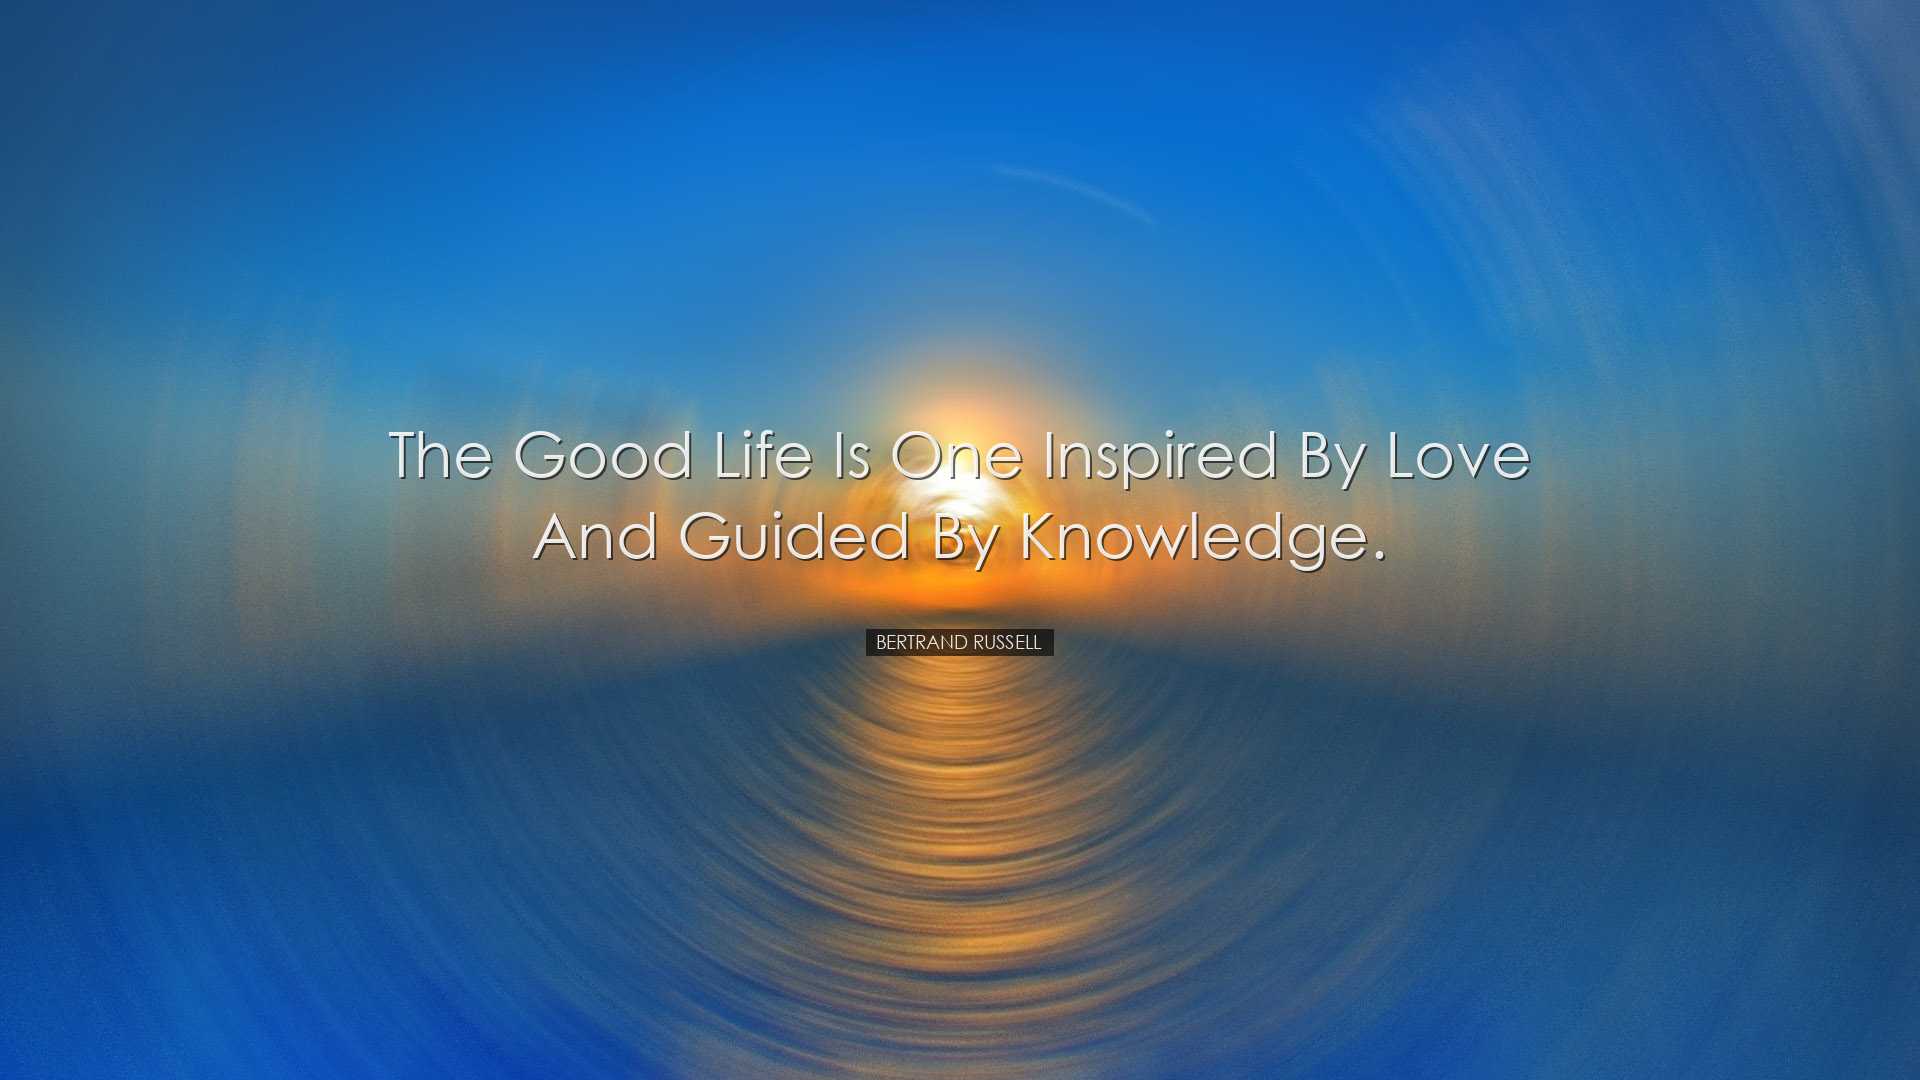 The good life is one inspired by love and guided by knowledge. - B